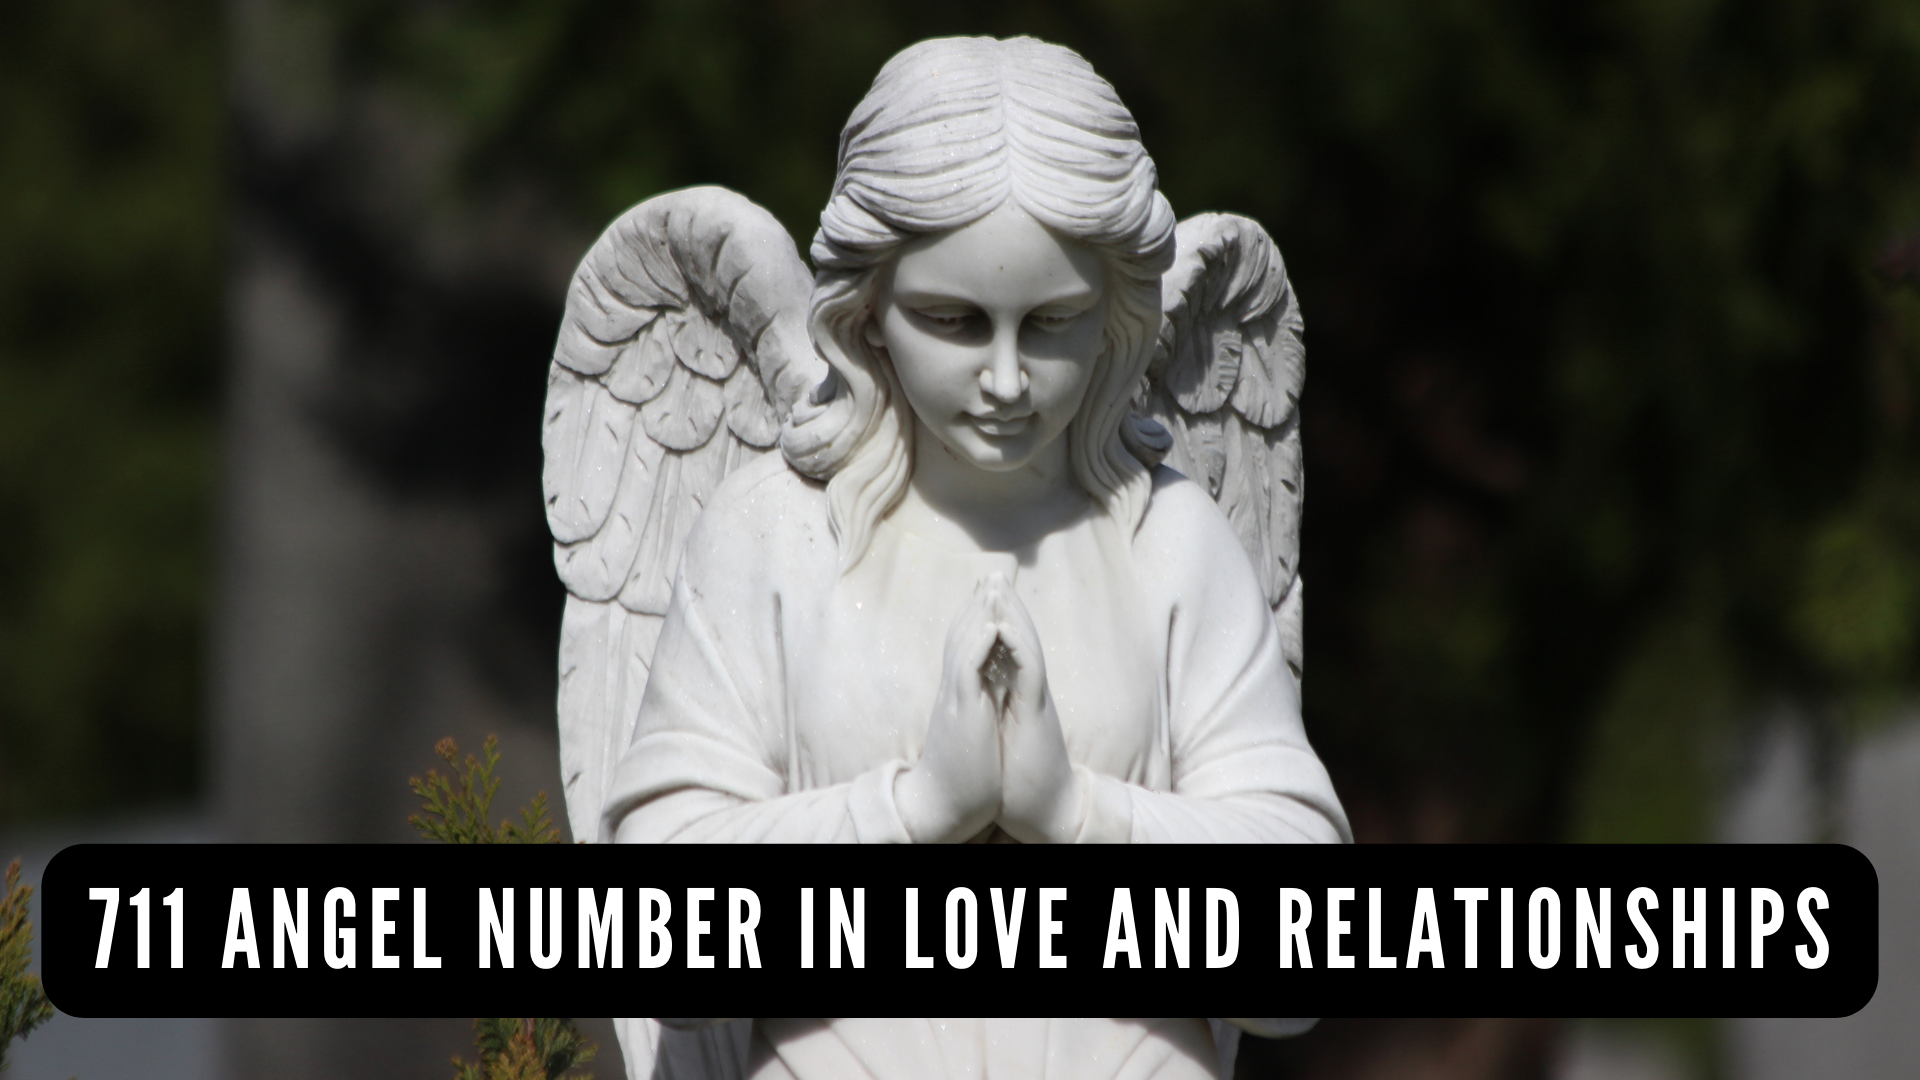 A praying angel statue with words 711 Angel Number In Love And Relationships